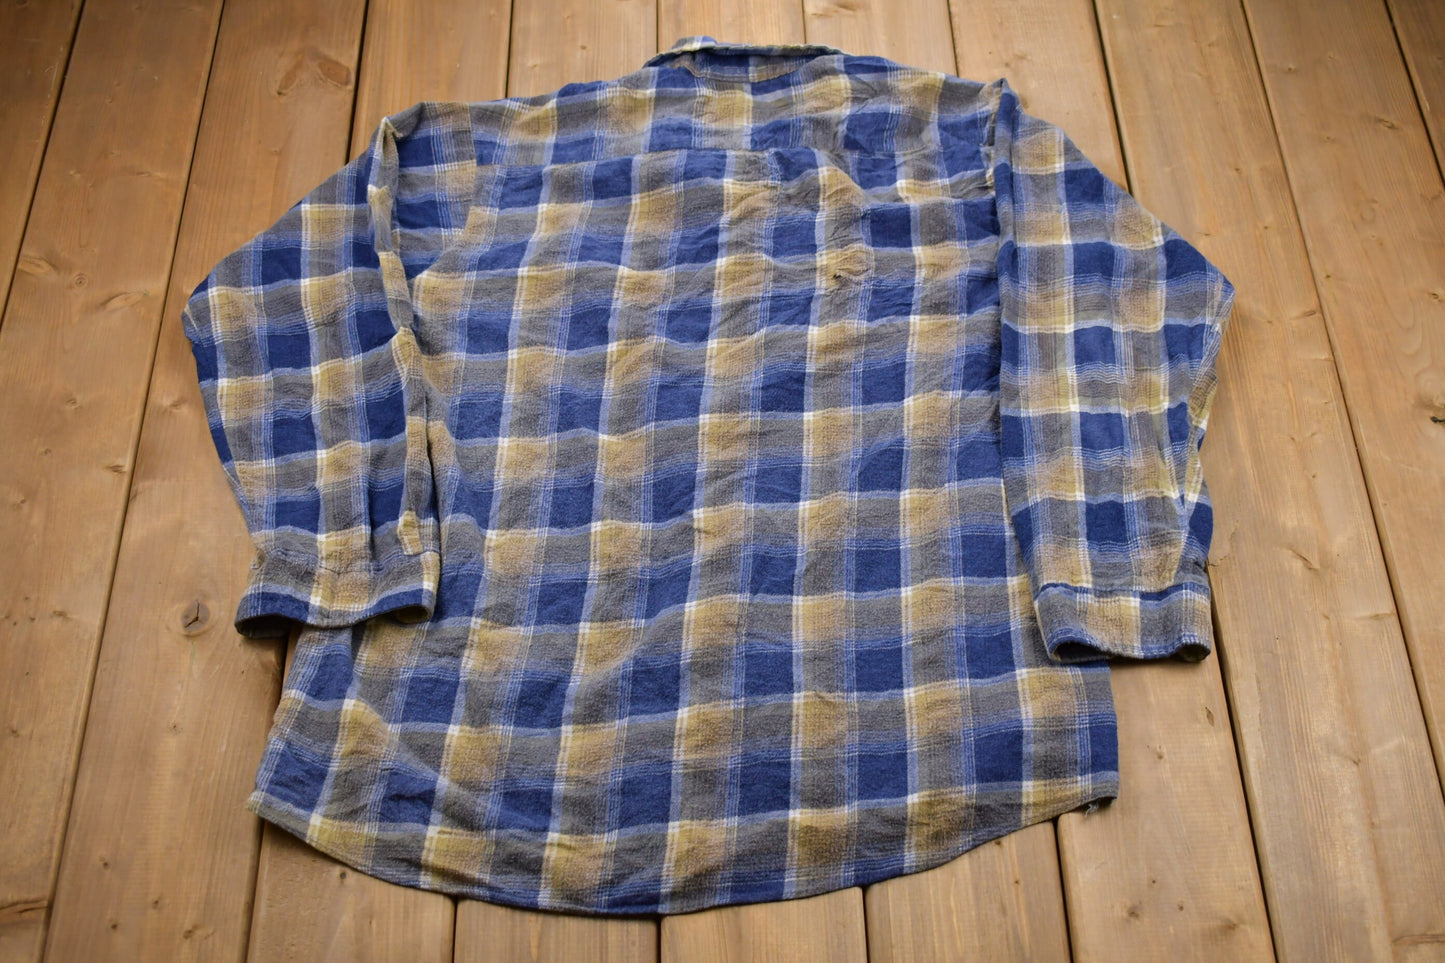 Vintage 1990s American Edition Plaid Button Up Shirt / 1990's Button Up / Vintage Flannel / Casual Wear / Workwear / Pattern Button Up